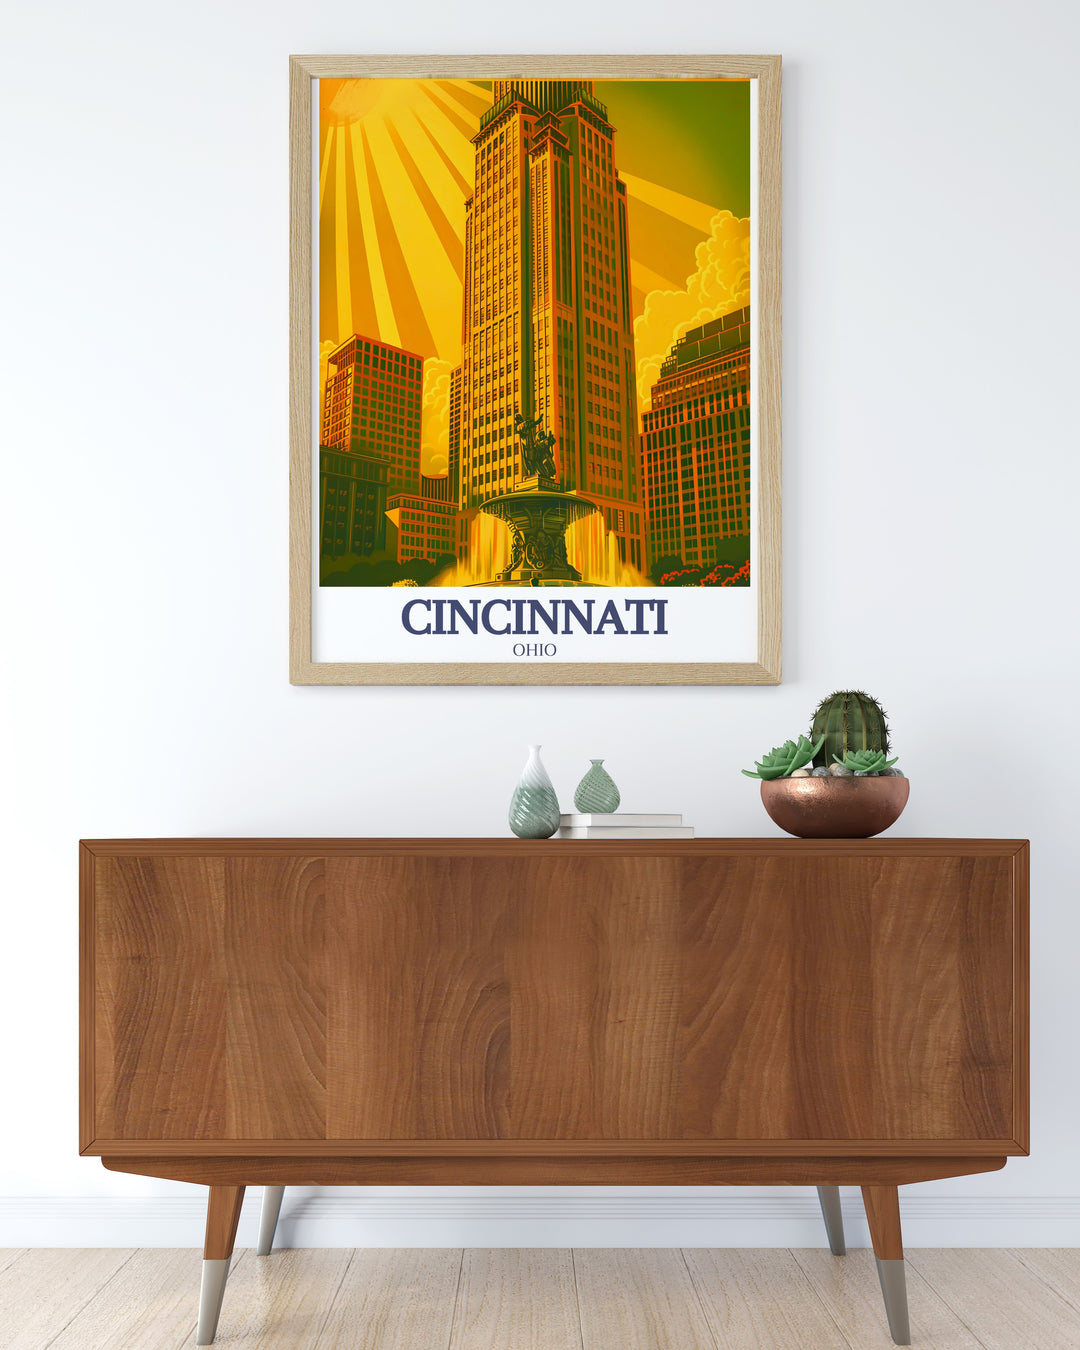 Elegant Cincinnati print of Carew Tower and Tyler Davidson Fountain blending vintage print and modern art elements a standout piece in any collection of city artwork and home decor